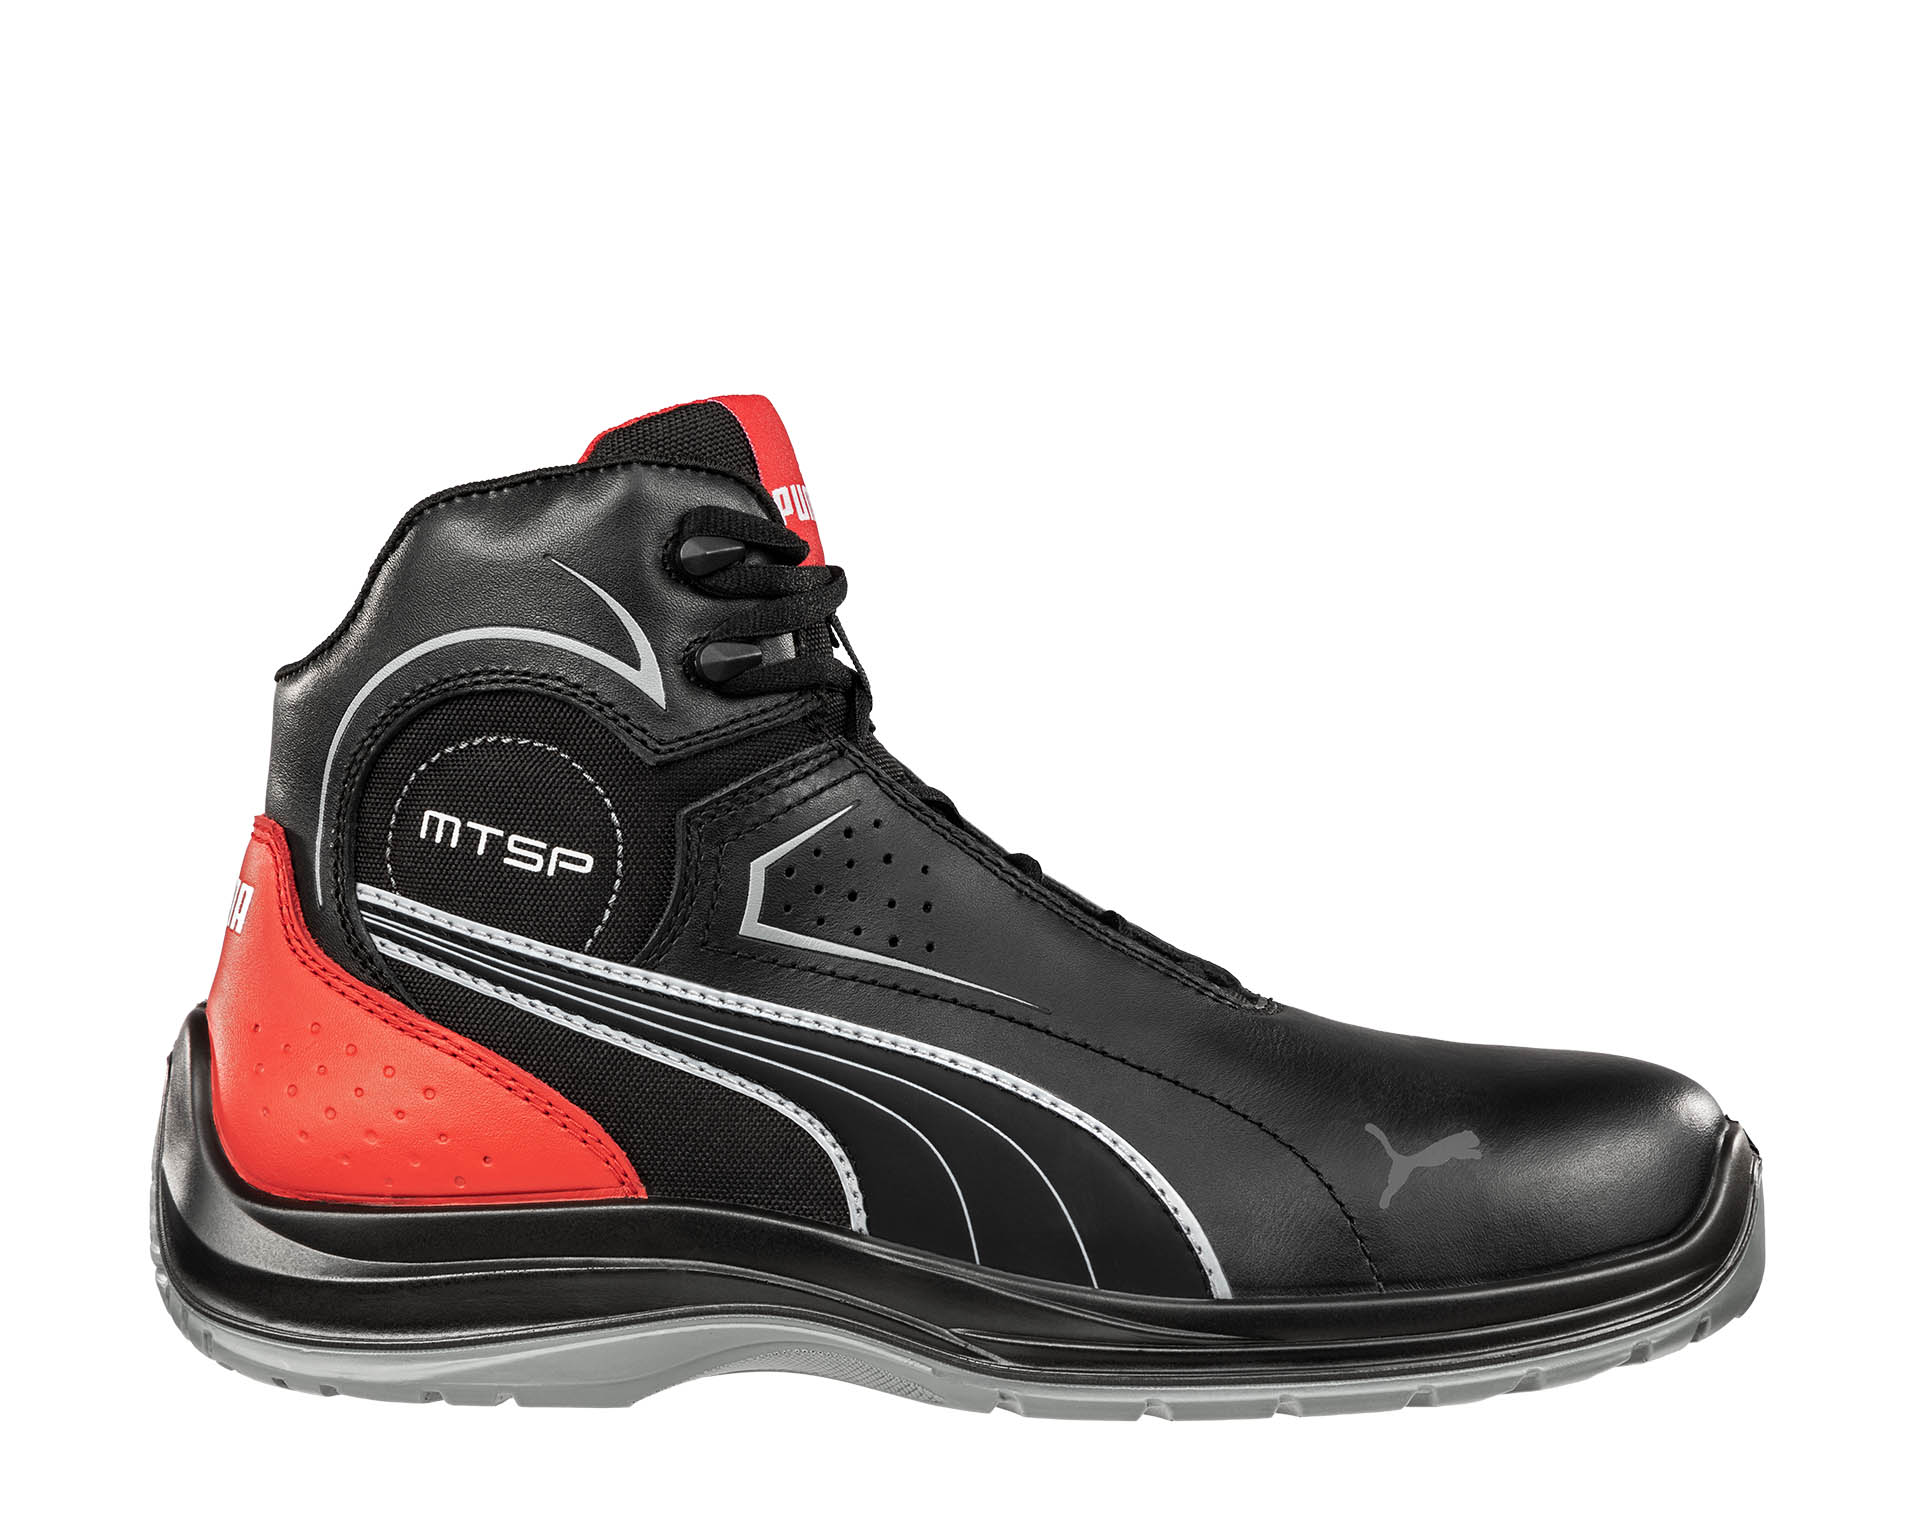 TOURING BLACK MID|PUMA EH Puma work | ASTM SR shoes Safety USA SAFETY